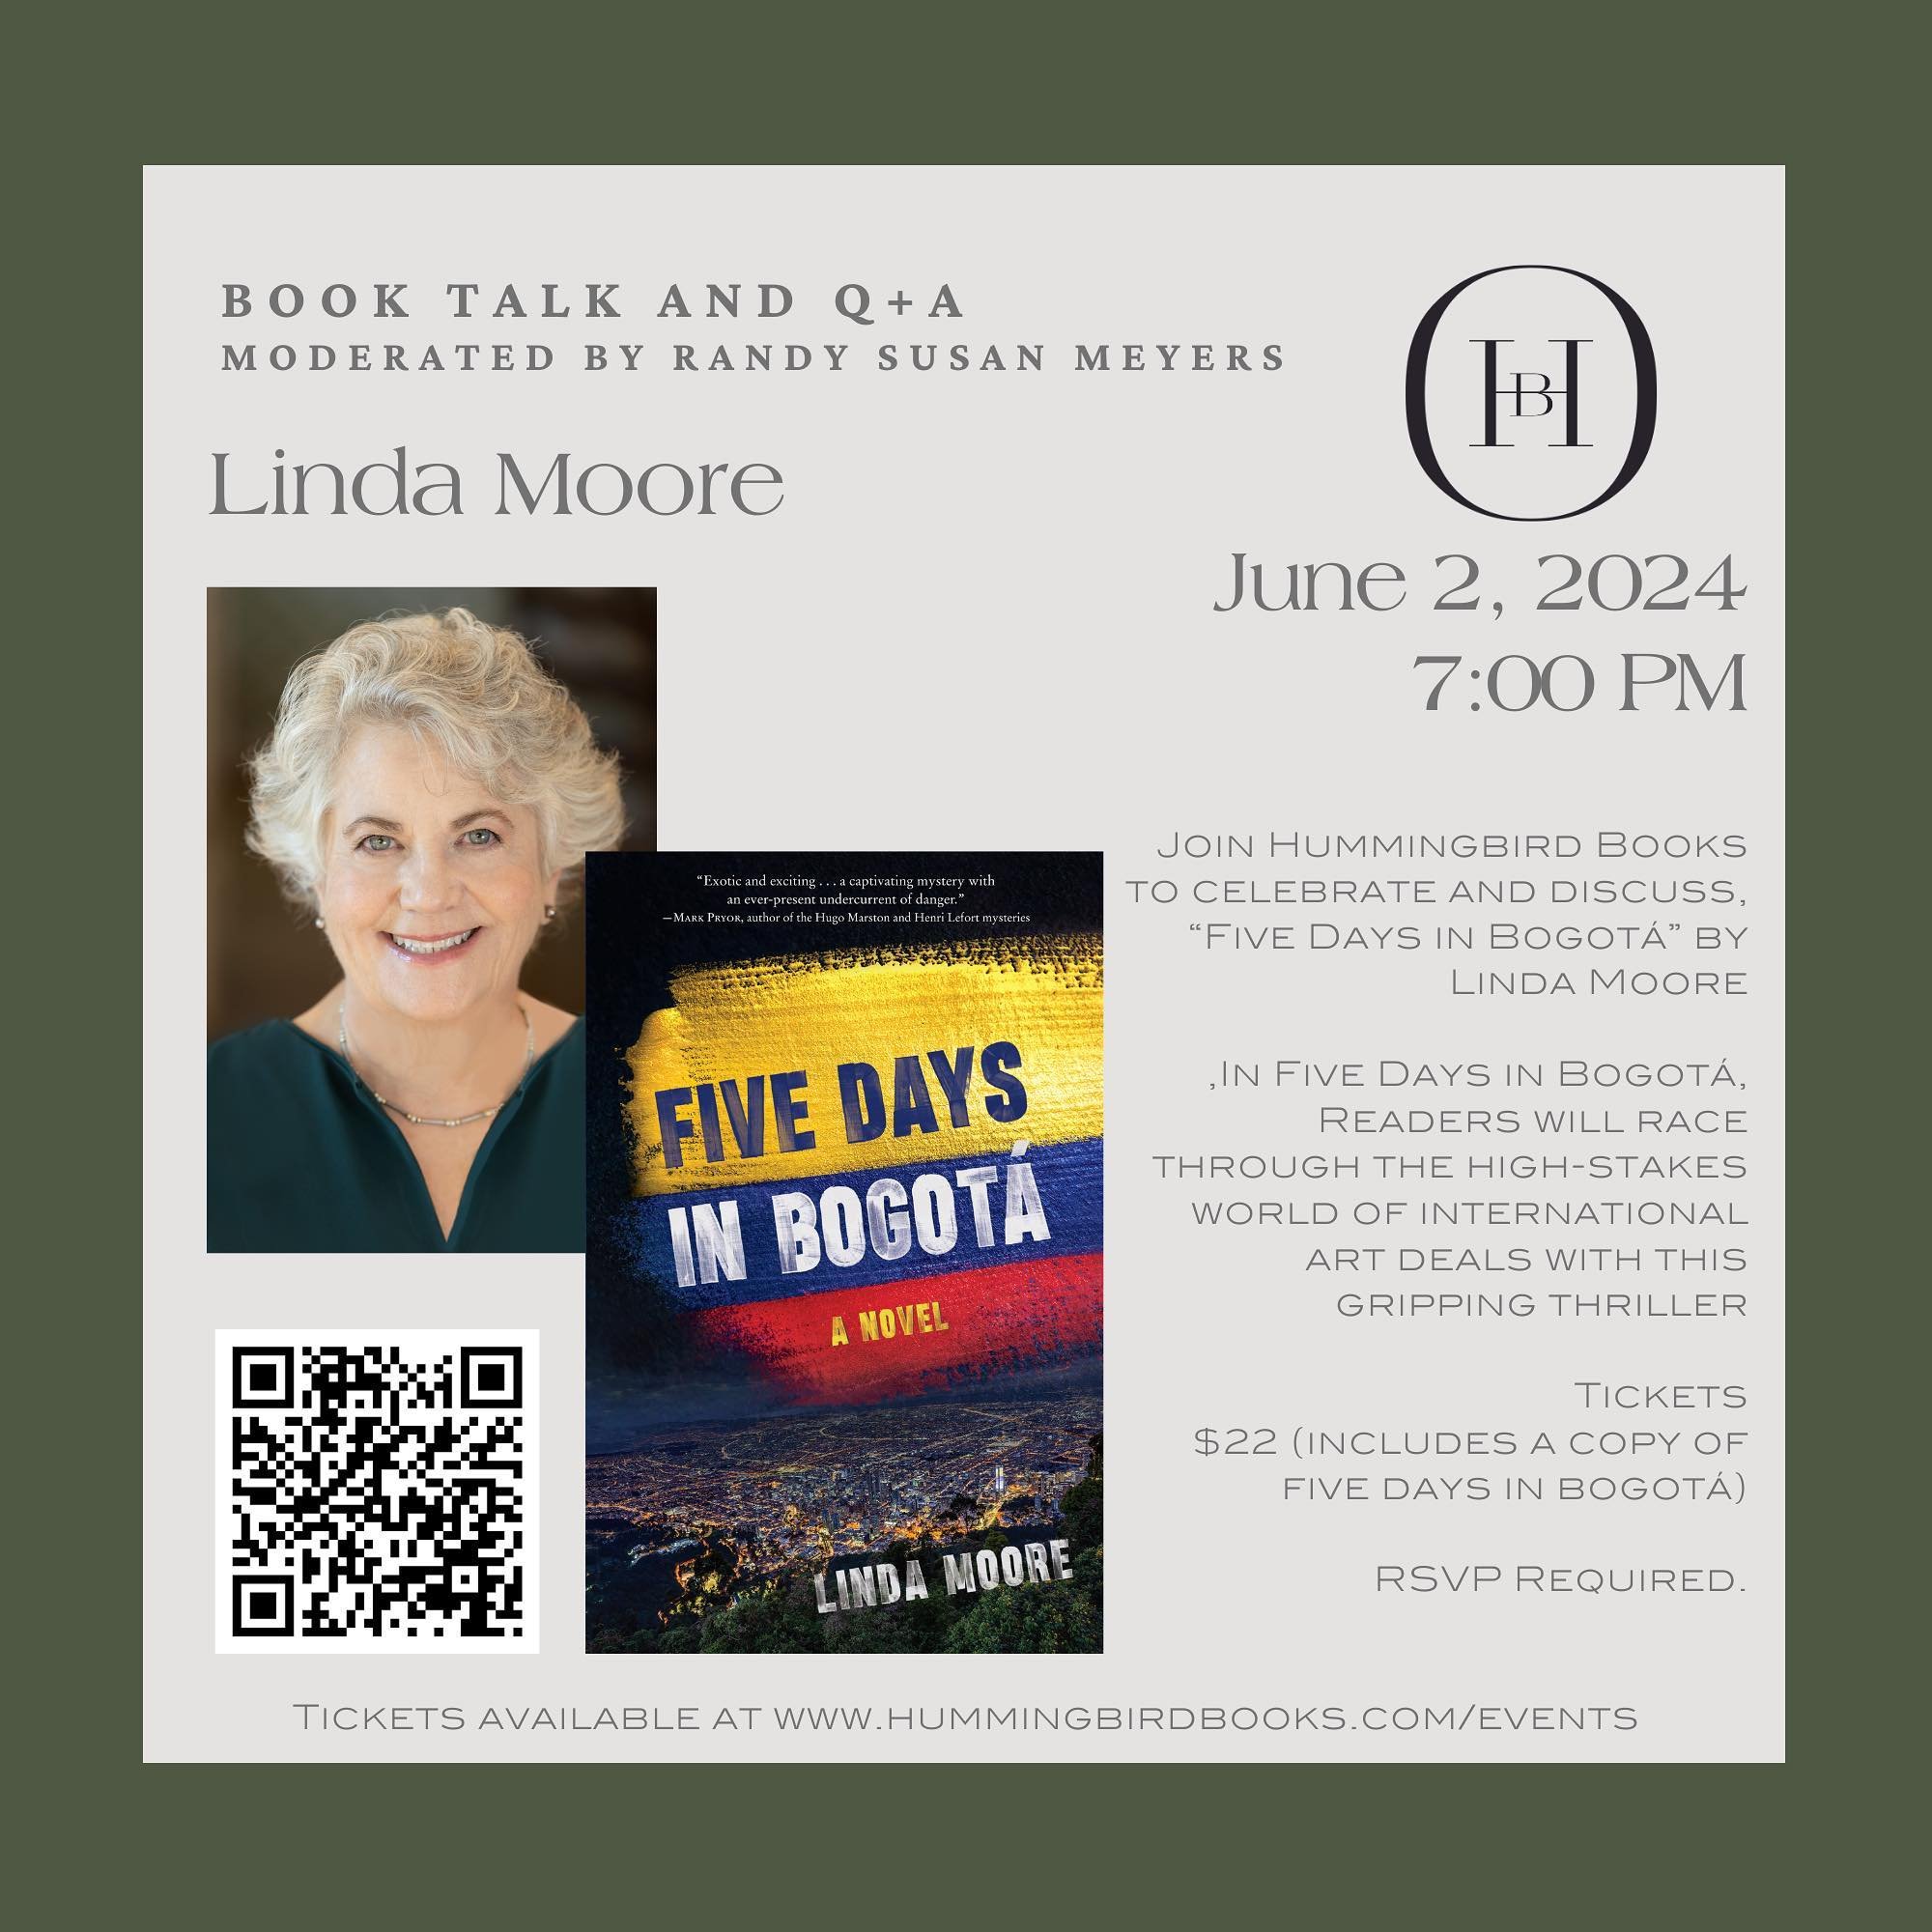 We&rsquo;re so excited to welcome @lindamooreauthor to Hummingbird Books on June 2nd! Join us in discussing her new book, &ldquo;Five Days In Bogot&aacute;,&rdquo; moderated by @randysusanmeyersauthor. 

Tickets are available through the events page 